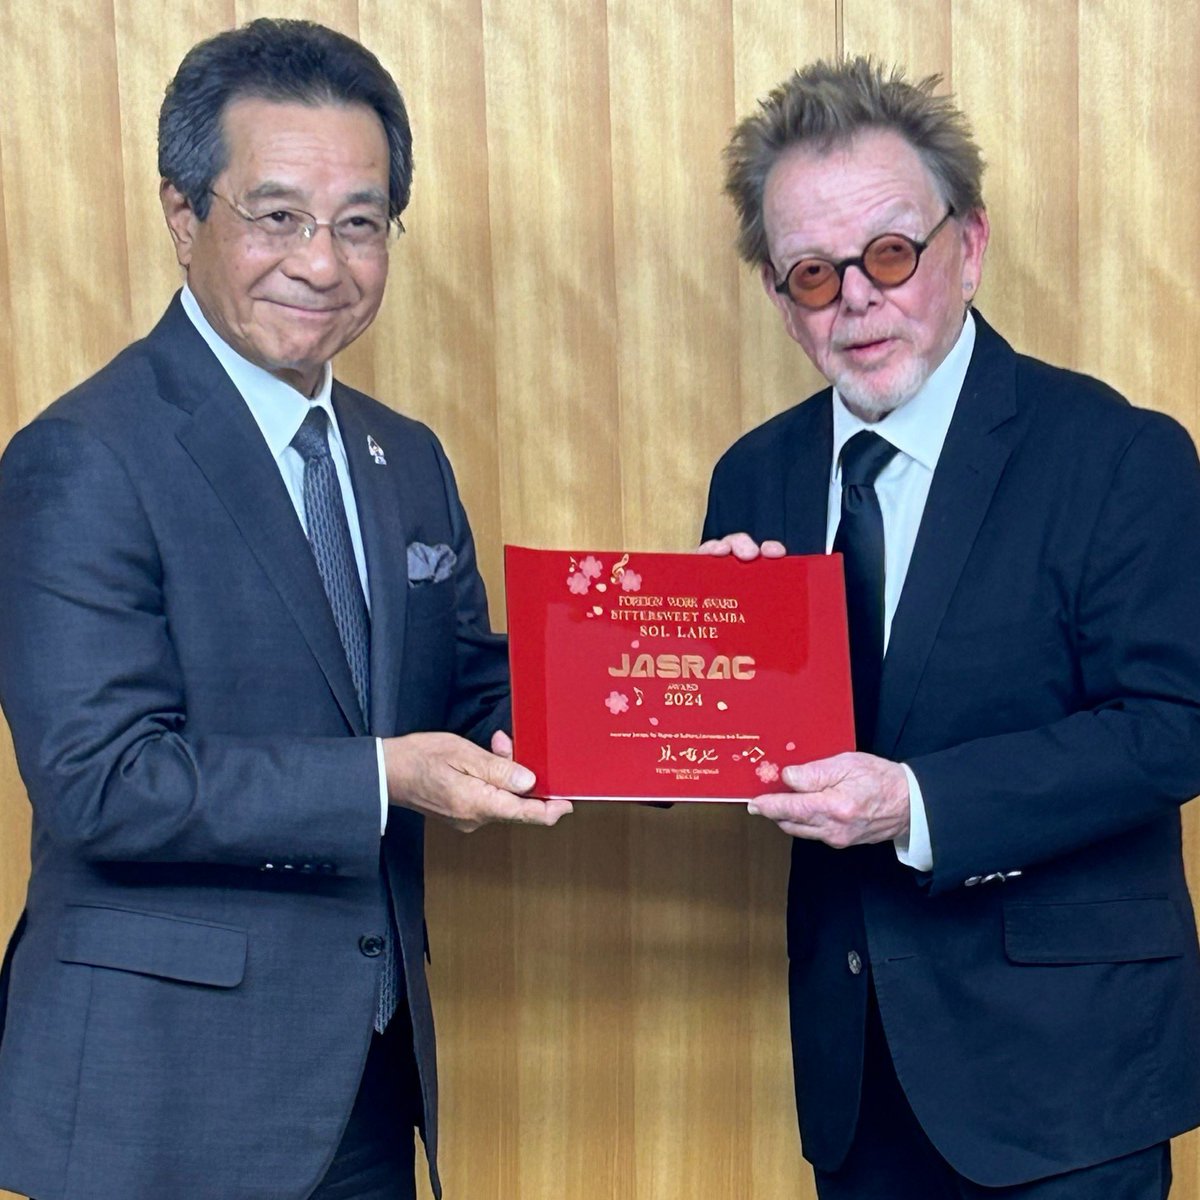 ASCAP President & Chairman of the Board Paul Williams was presented with the Foreign Work Award from JASRAC Chair Tetsuya Gen on the late Sol Lake’s behalf. 🎉 Sol Lake wrote “Bittersweet Samba,” performed most famously by Herb Alpert and the Tijuana Brass Brand.